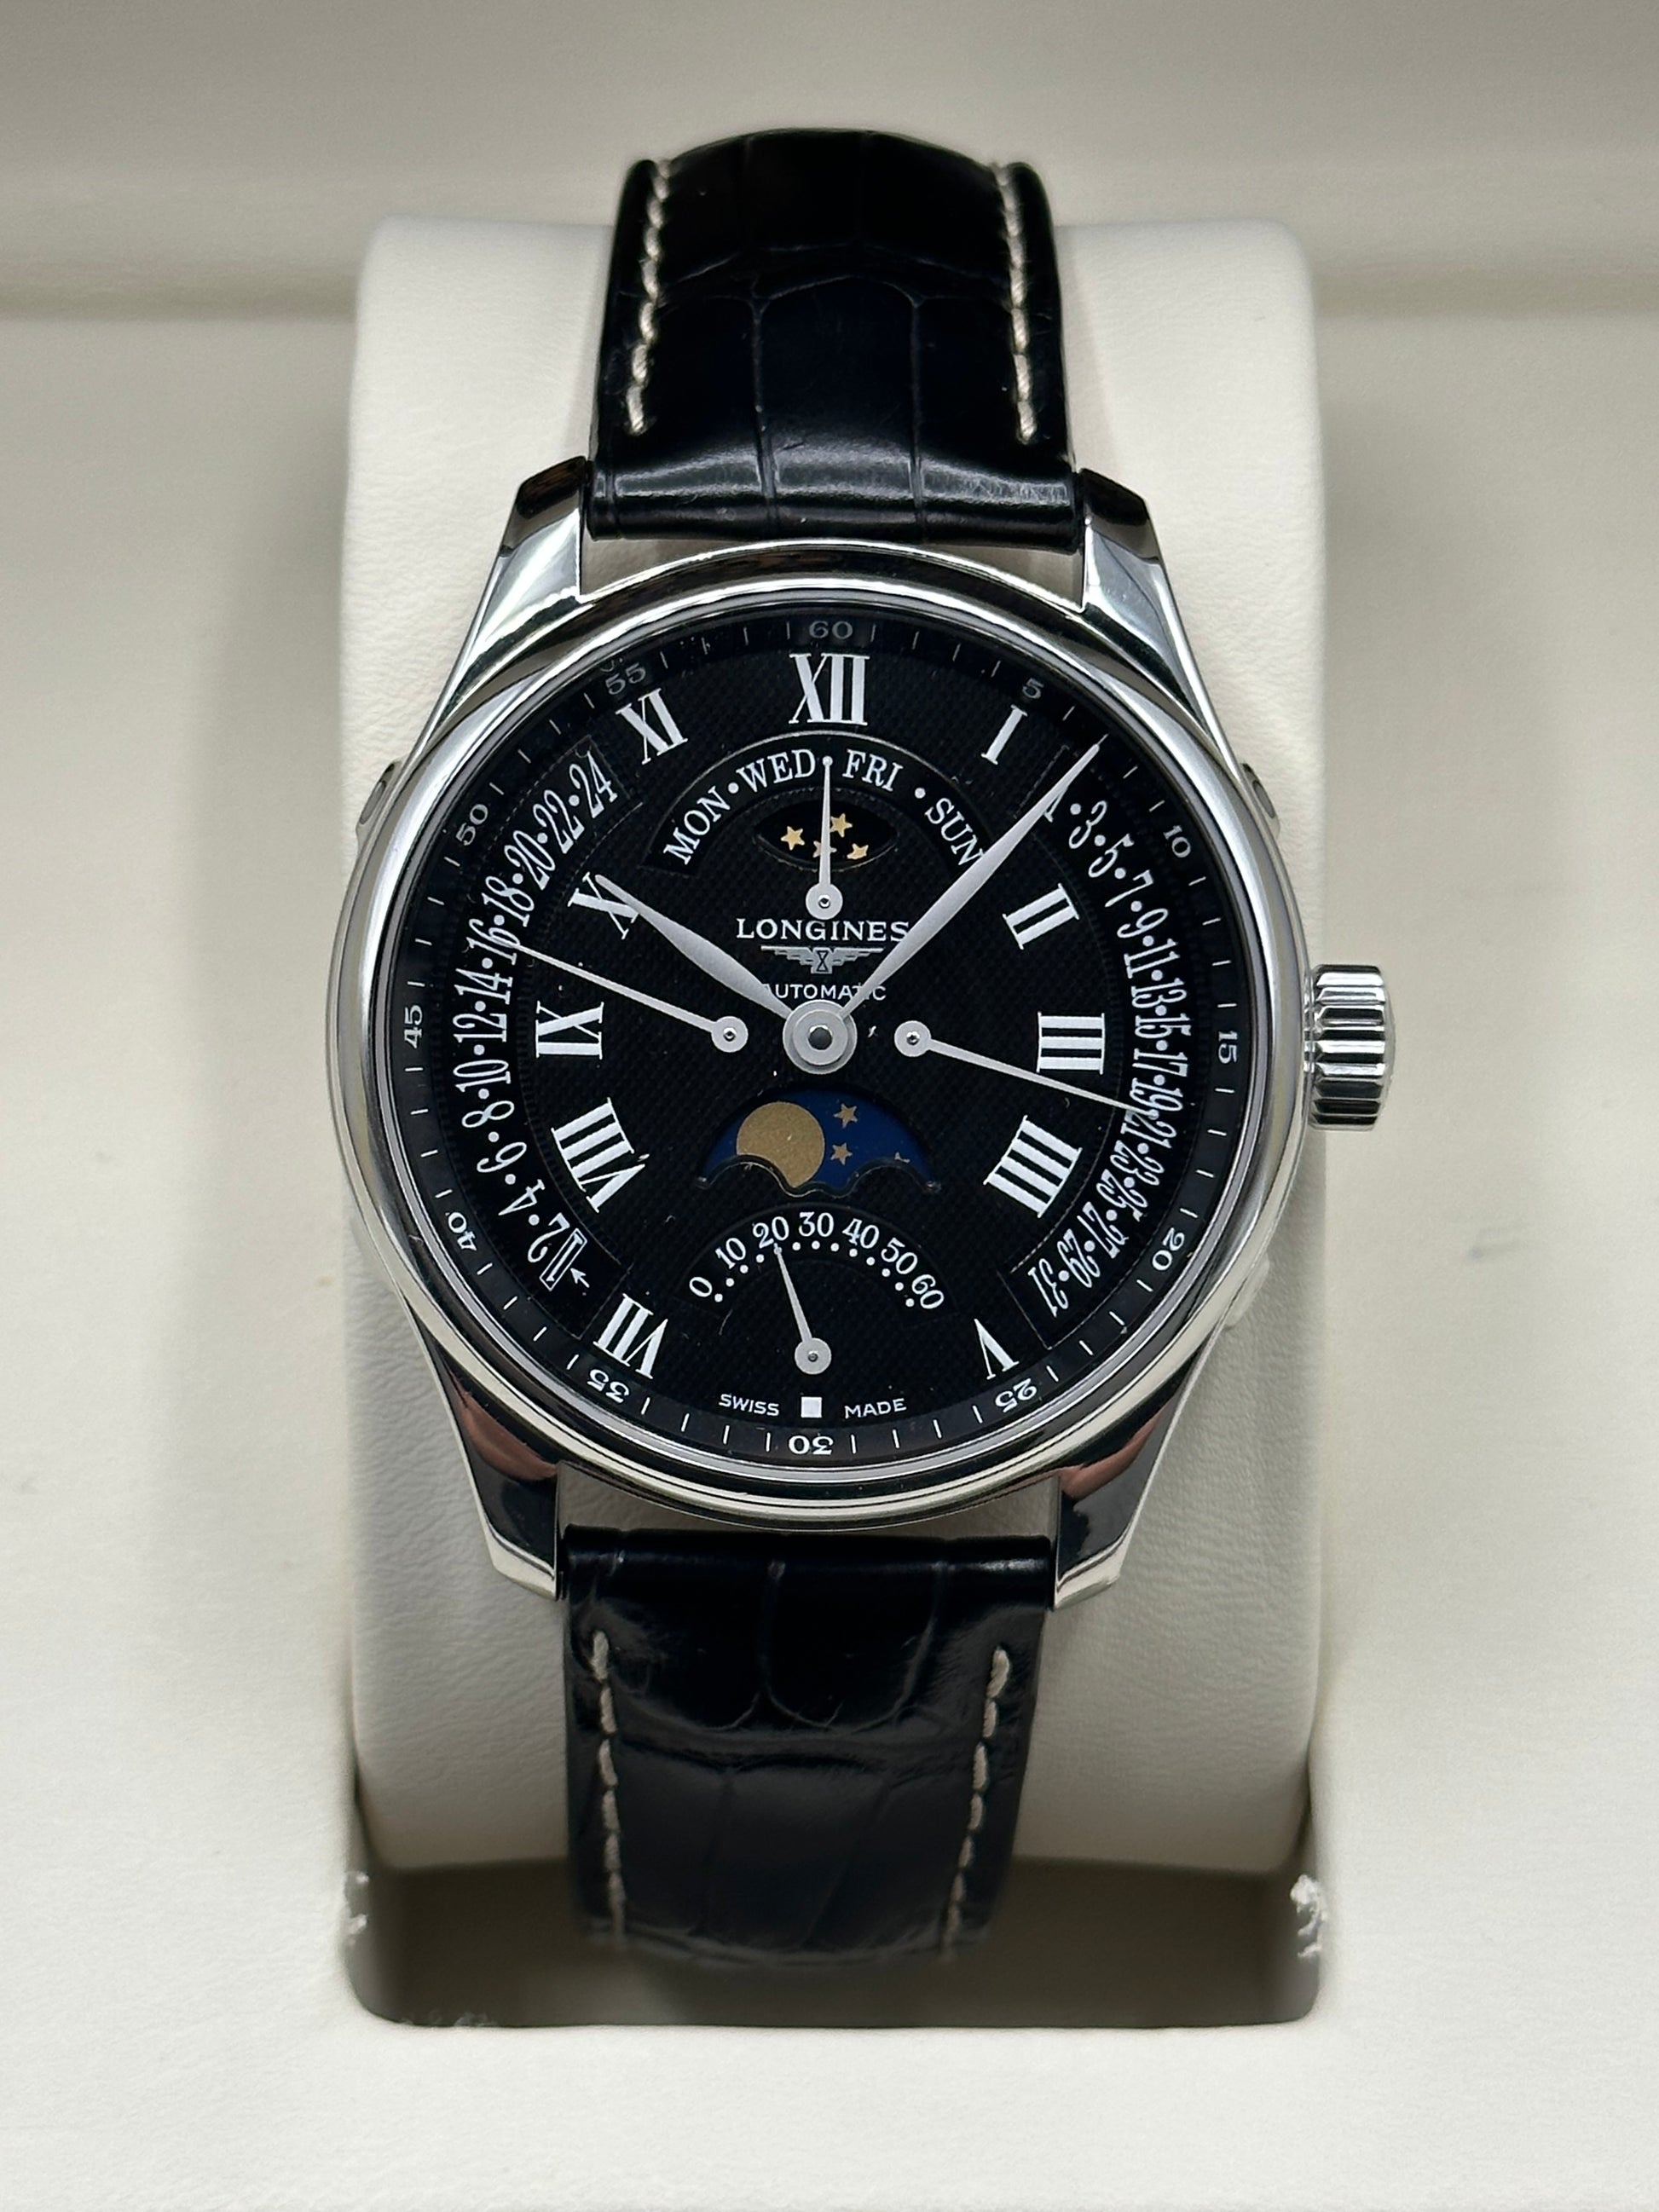 2017 Longines L2.739.4.51.6 Master Moonphase GMT - MyWatchLLC